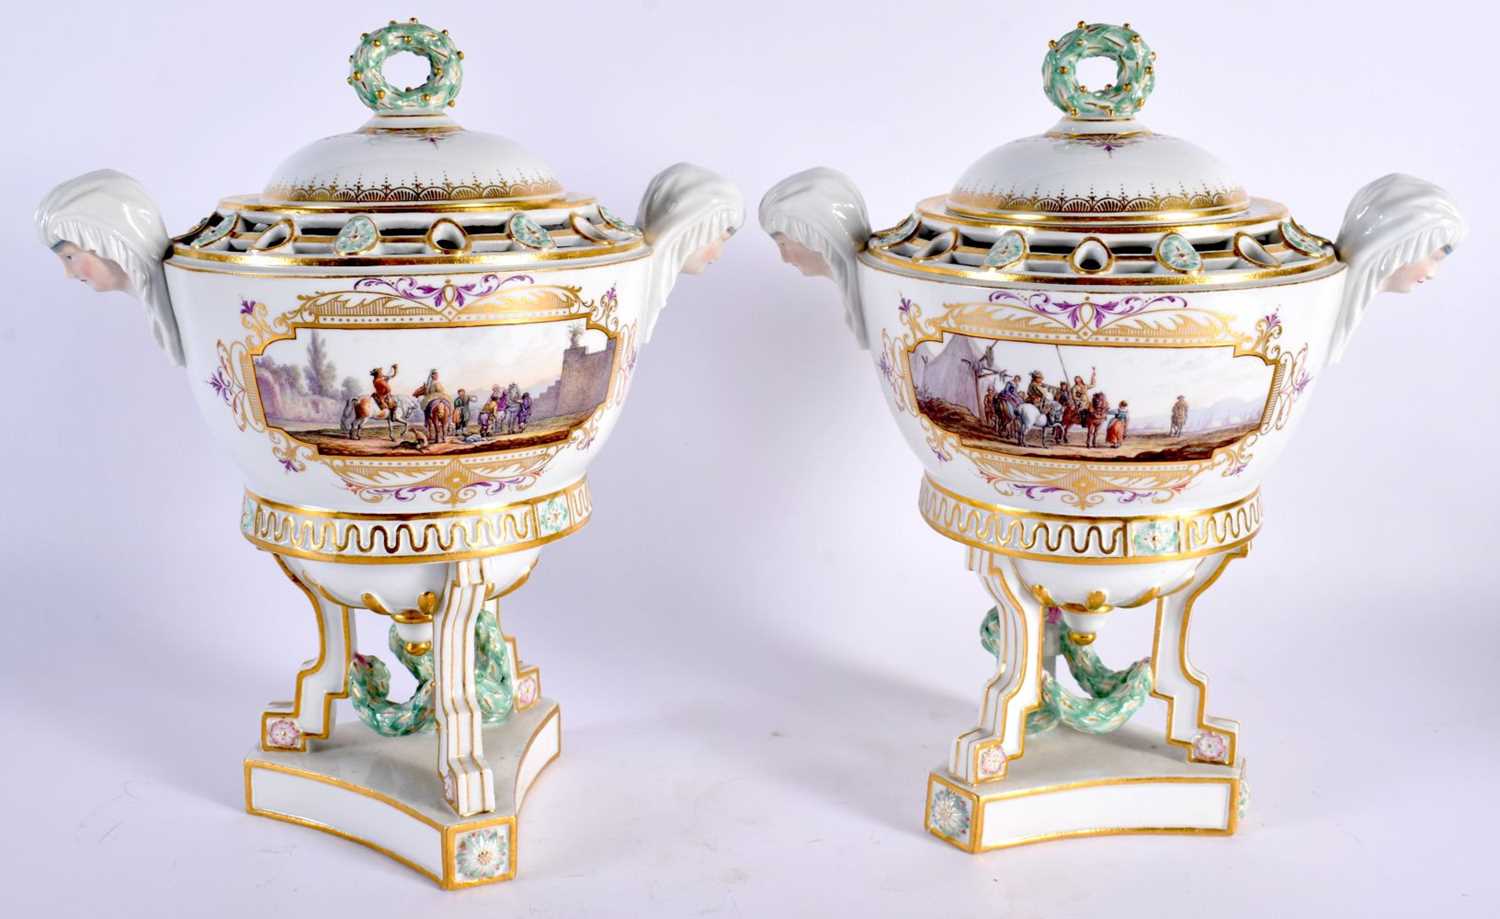 A FINE PAIR OF 19TH ENTURY MEISSEN POT-POURRI VASES AND COVERS with blue crossed swords marks, - Image 6 of 18